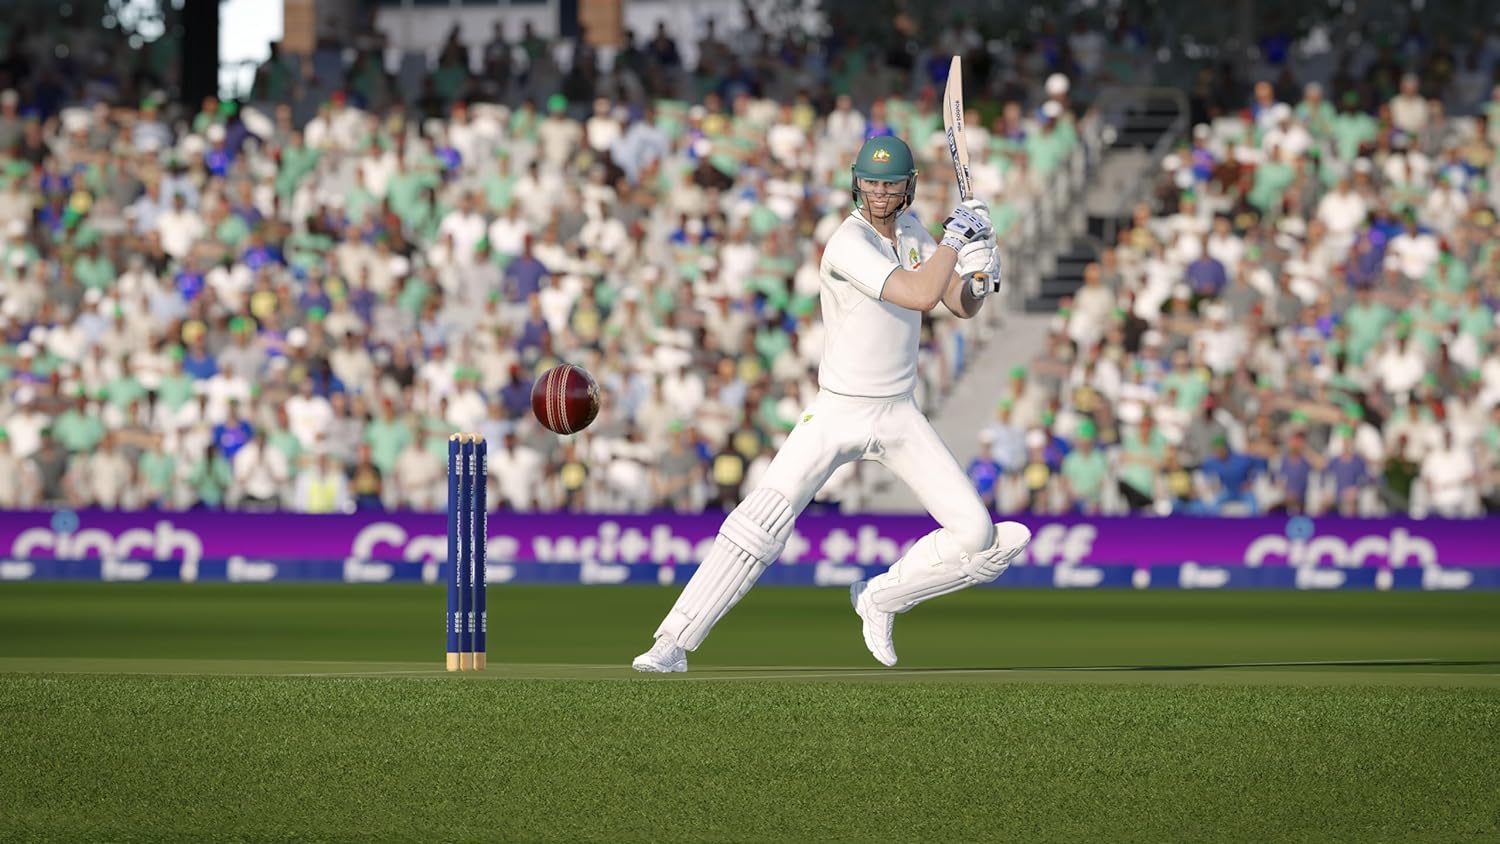 Cricket 24 for PS4